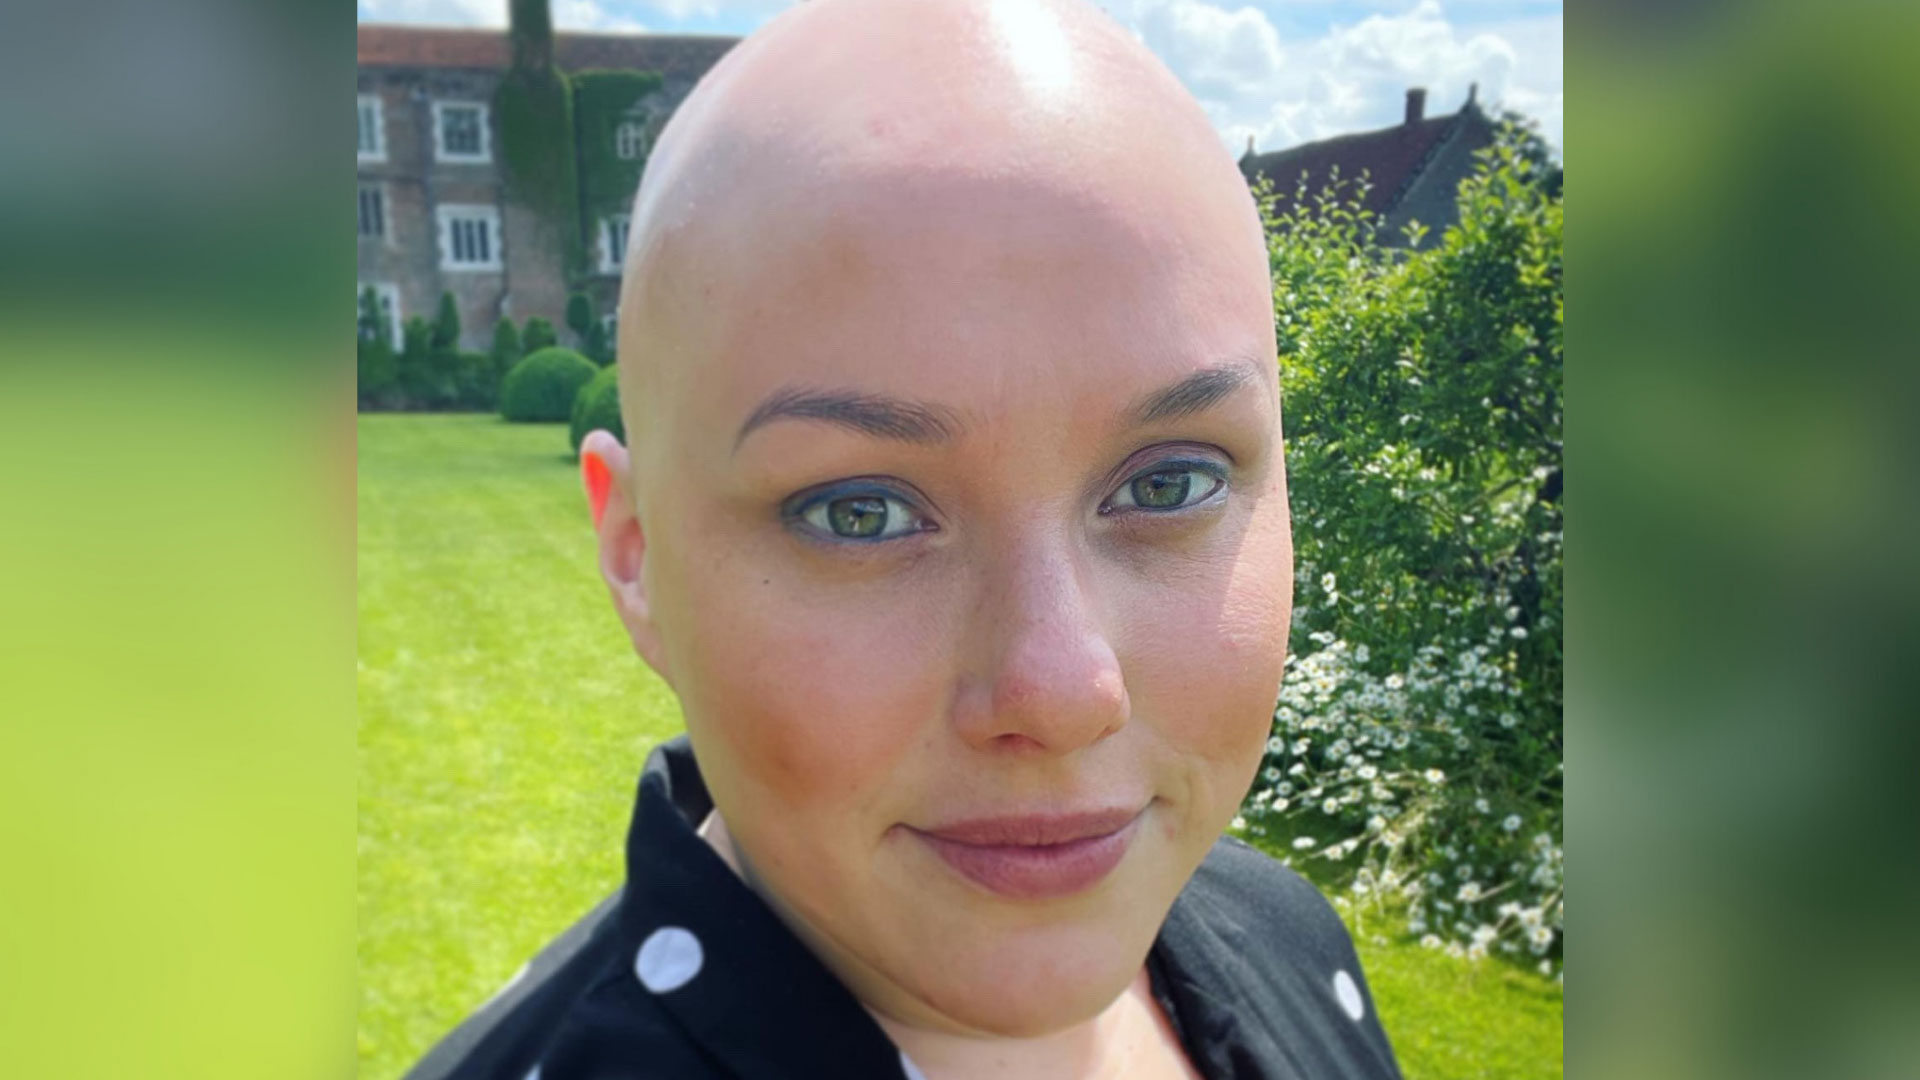 Campaigner Laura is a white woman with alopecia and is bald. She is wearing a black top with large white polka dots and has grass and trees behind her.